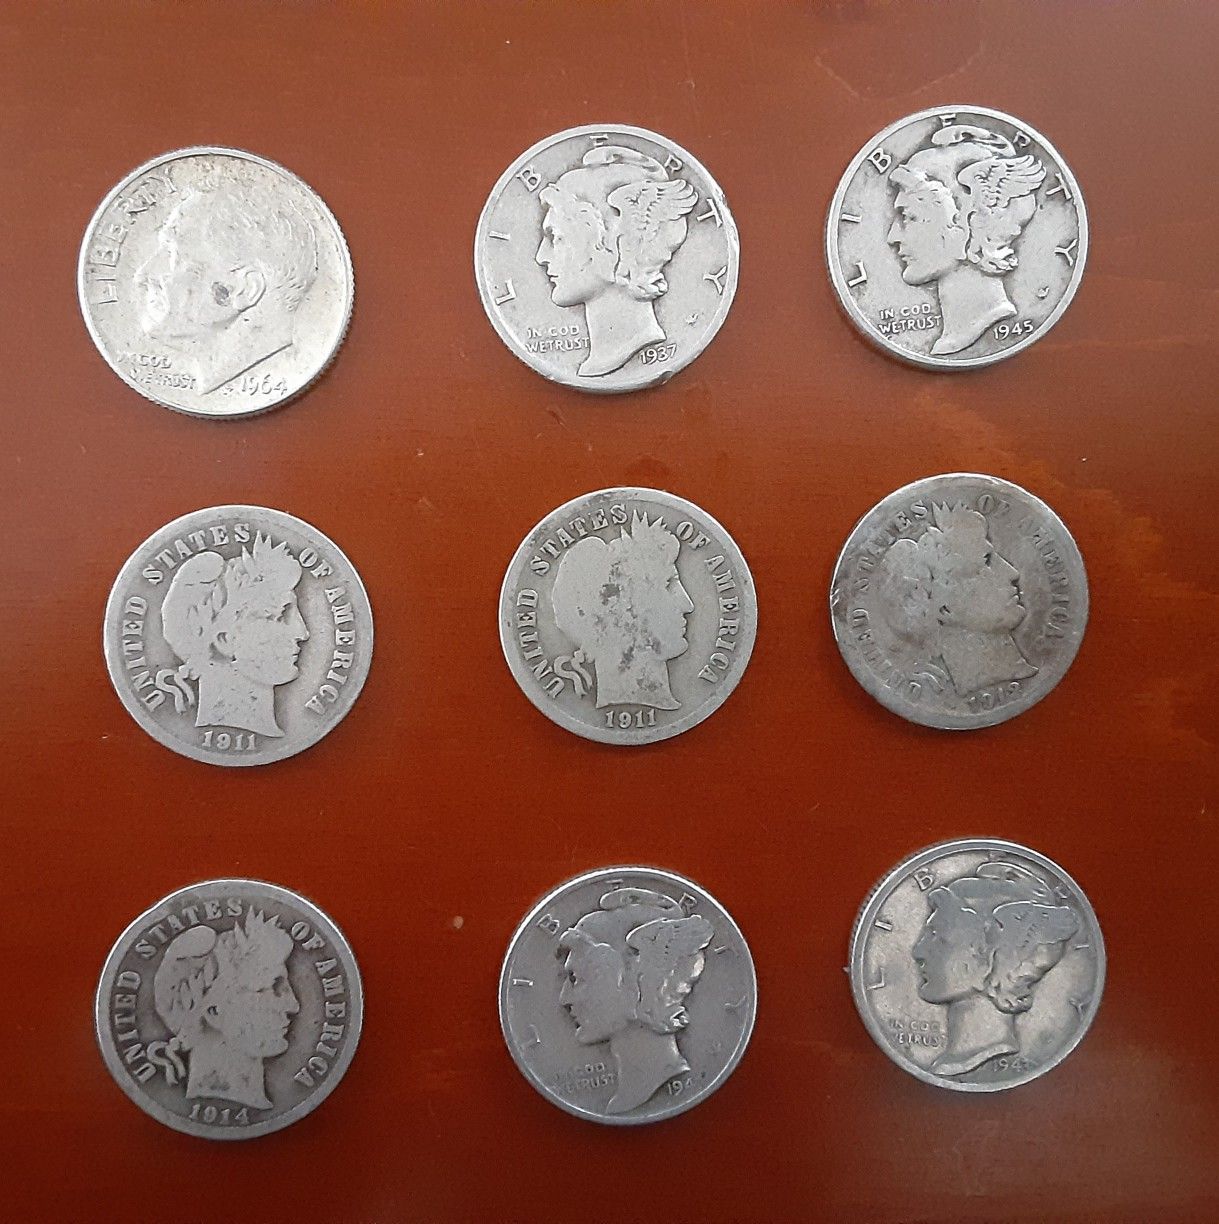 Lot of 9 Silver Dimes, 4 1900s Barber's, 4 1930/40s Mercury and 1 1964 Roosevelt all 90%!